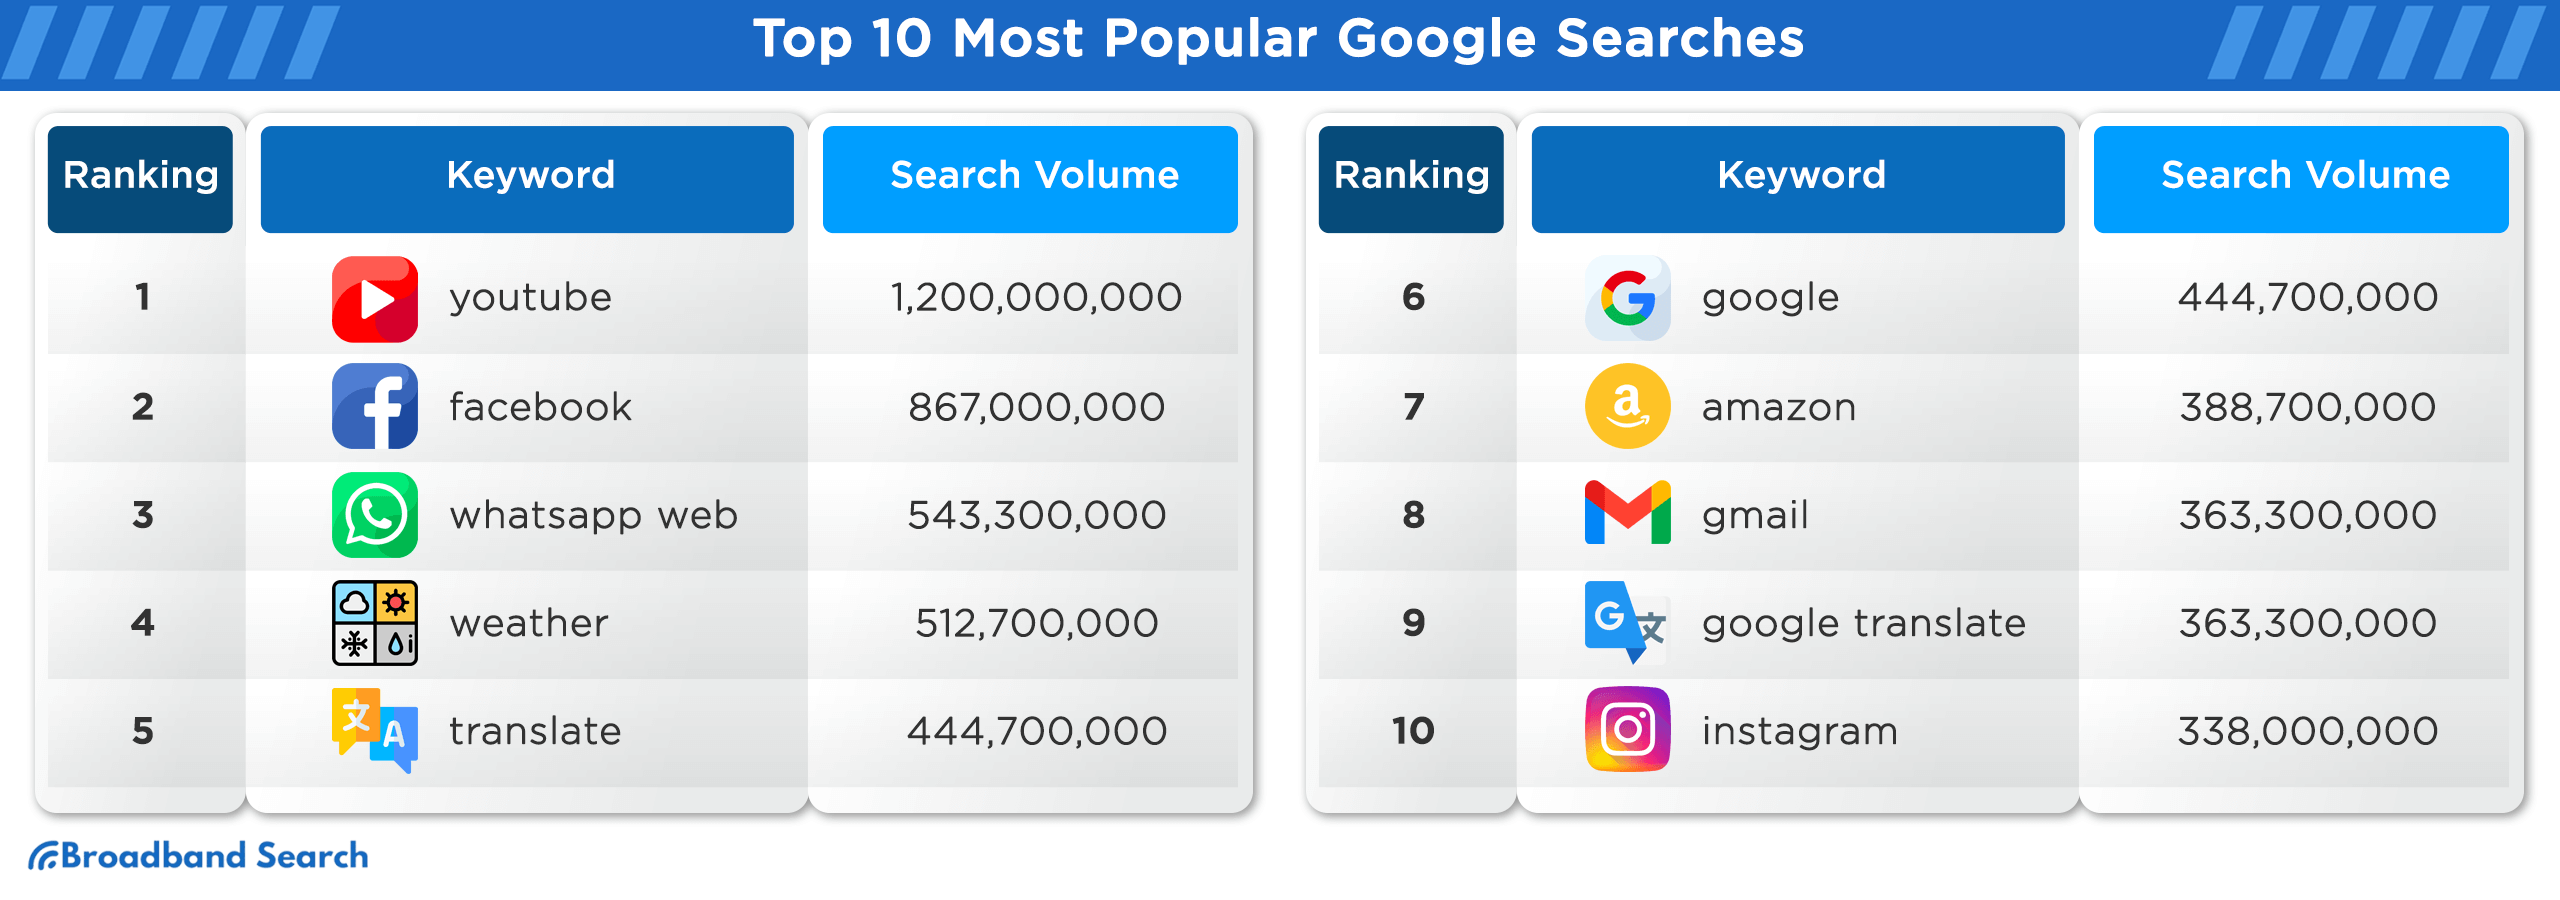 Top 10 most popular google searches